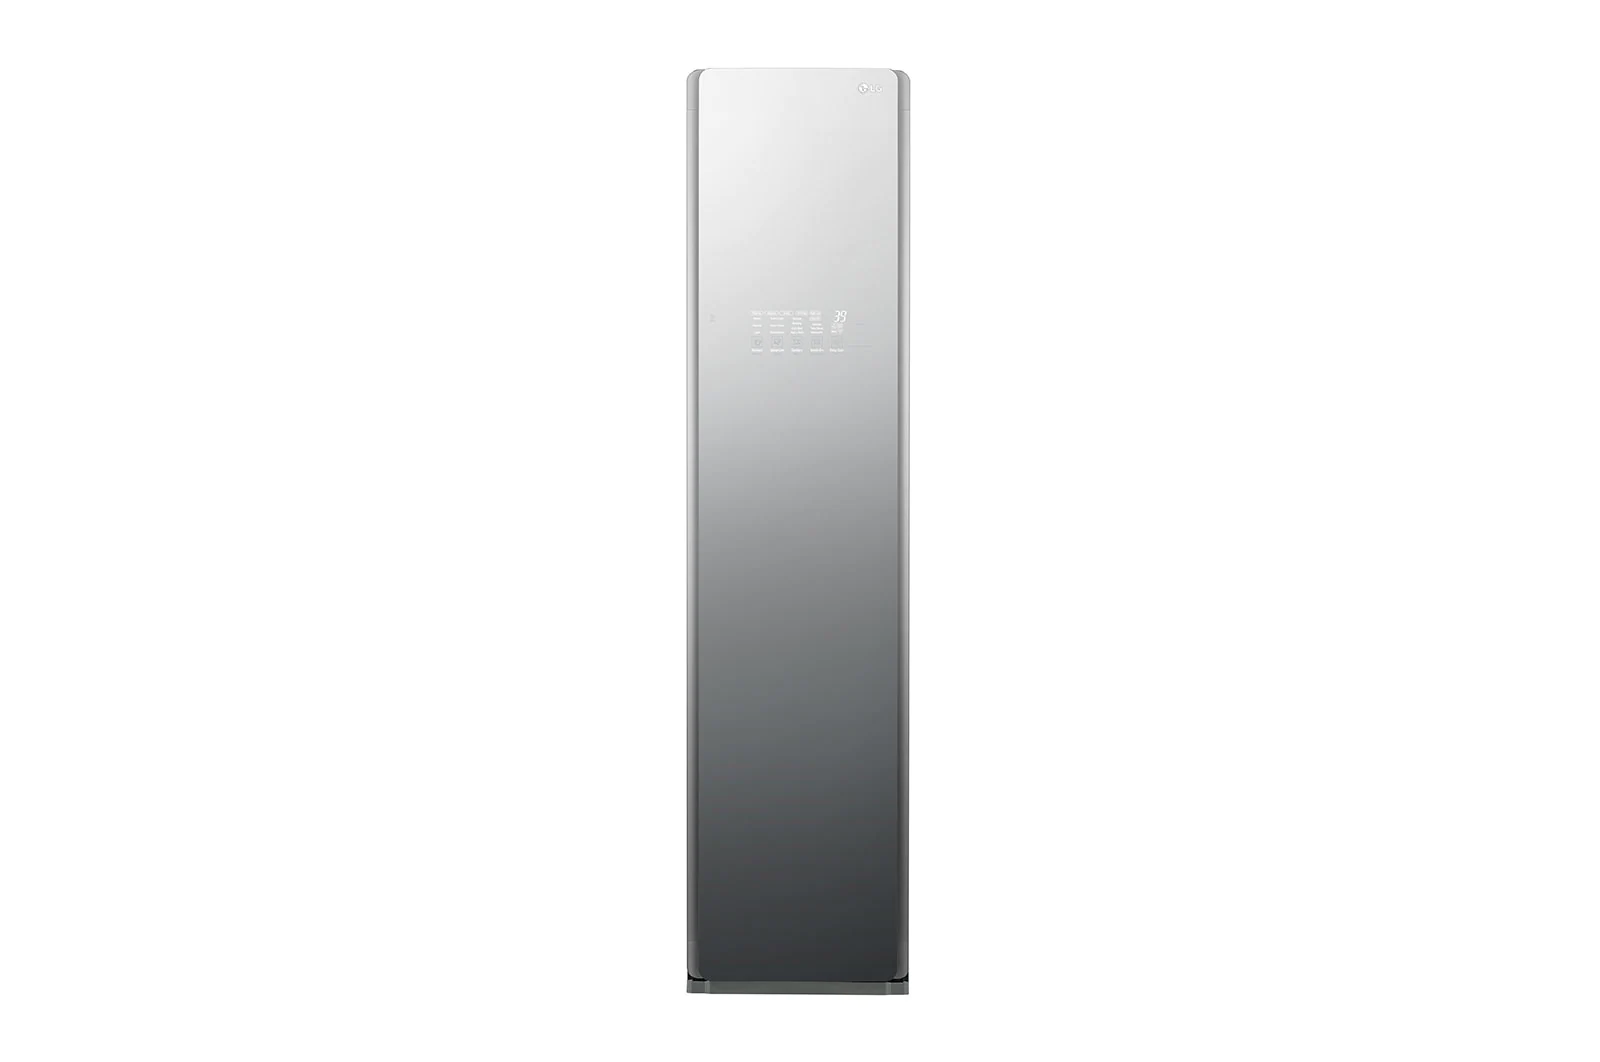 LG-Styler-Essence-Mirrored-Finish-CS3MFC-S-image.png